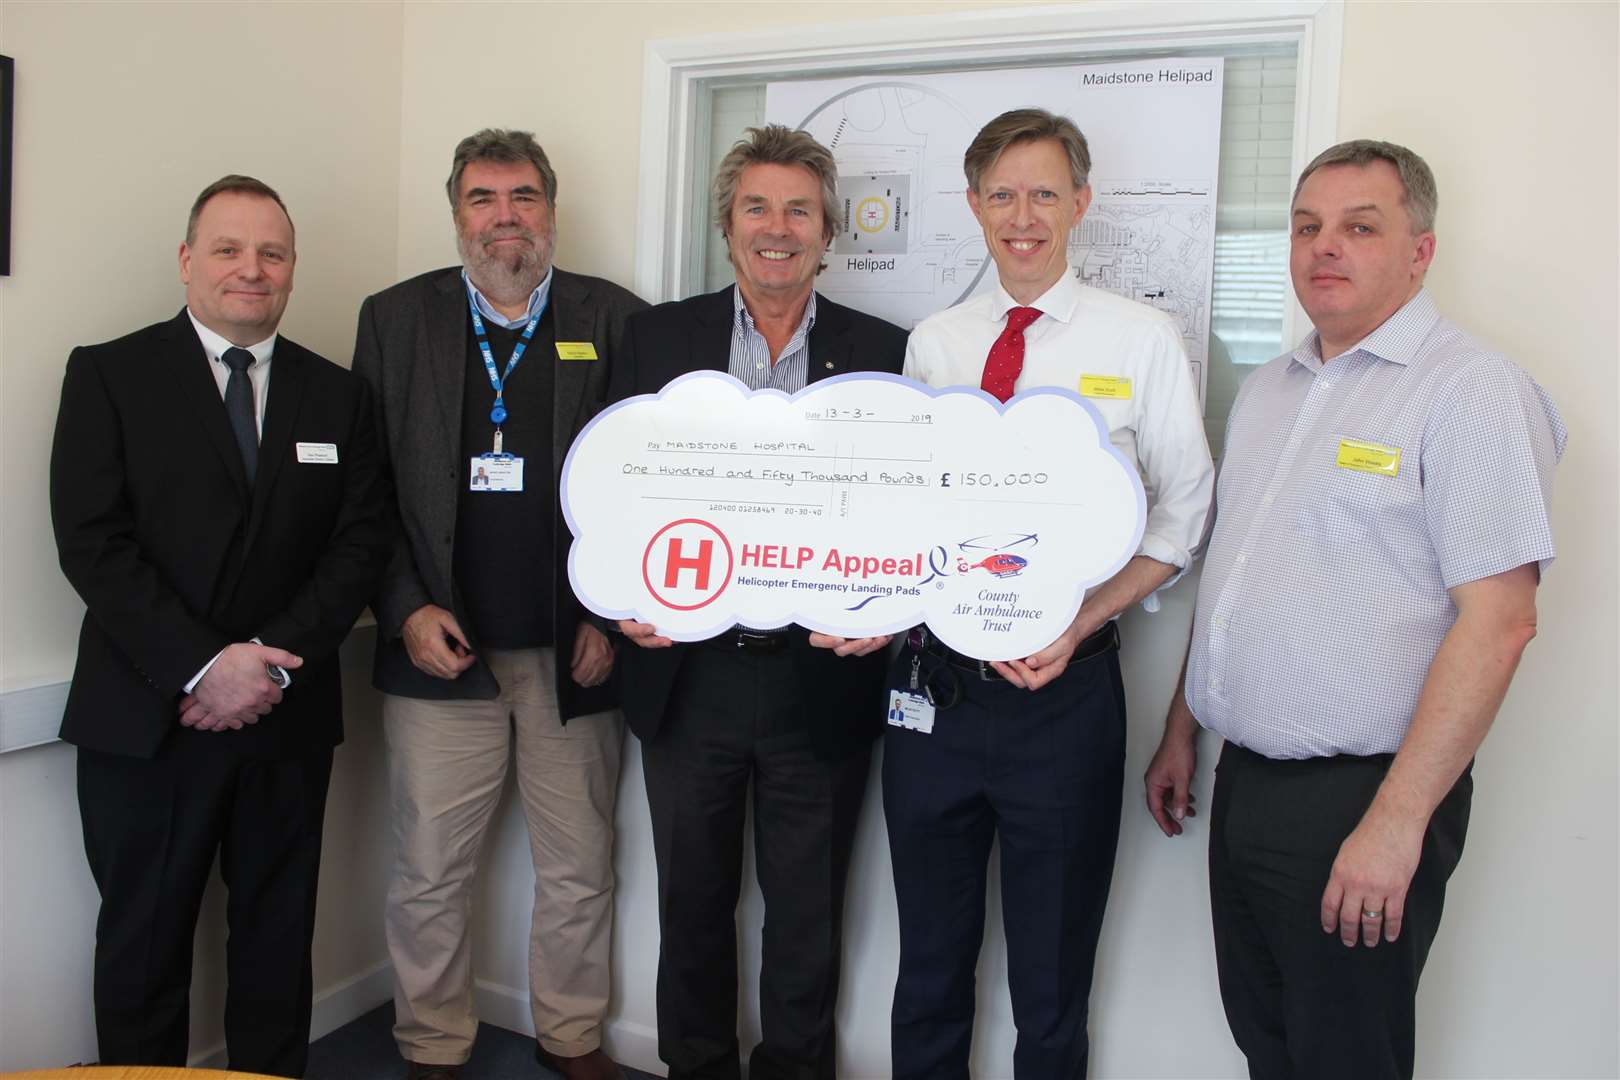 Kev Pearson MTW Associate Director of Estates, David Highton MTW Chairman, Robert Bertram CEO of HELP Appeal, Miles Scott MTW Chief Executive and John Weeks MTW Head of Emergency Planning and Response. (7842767)